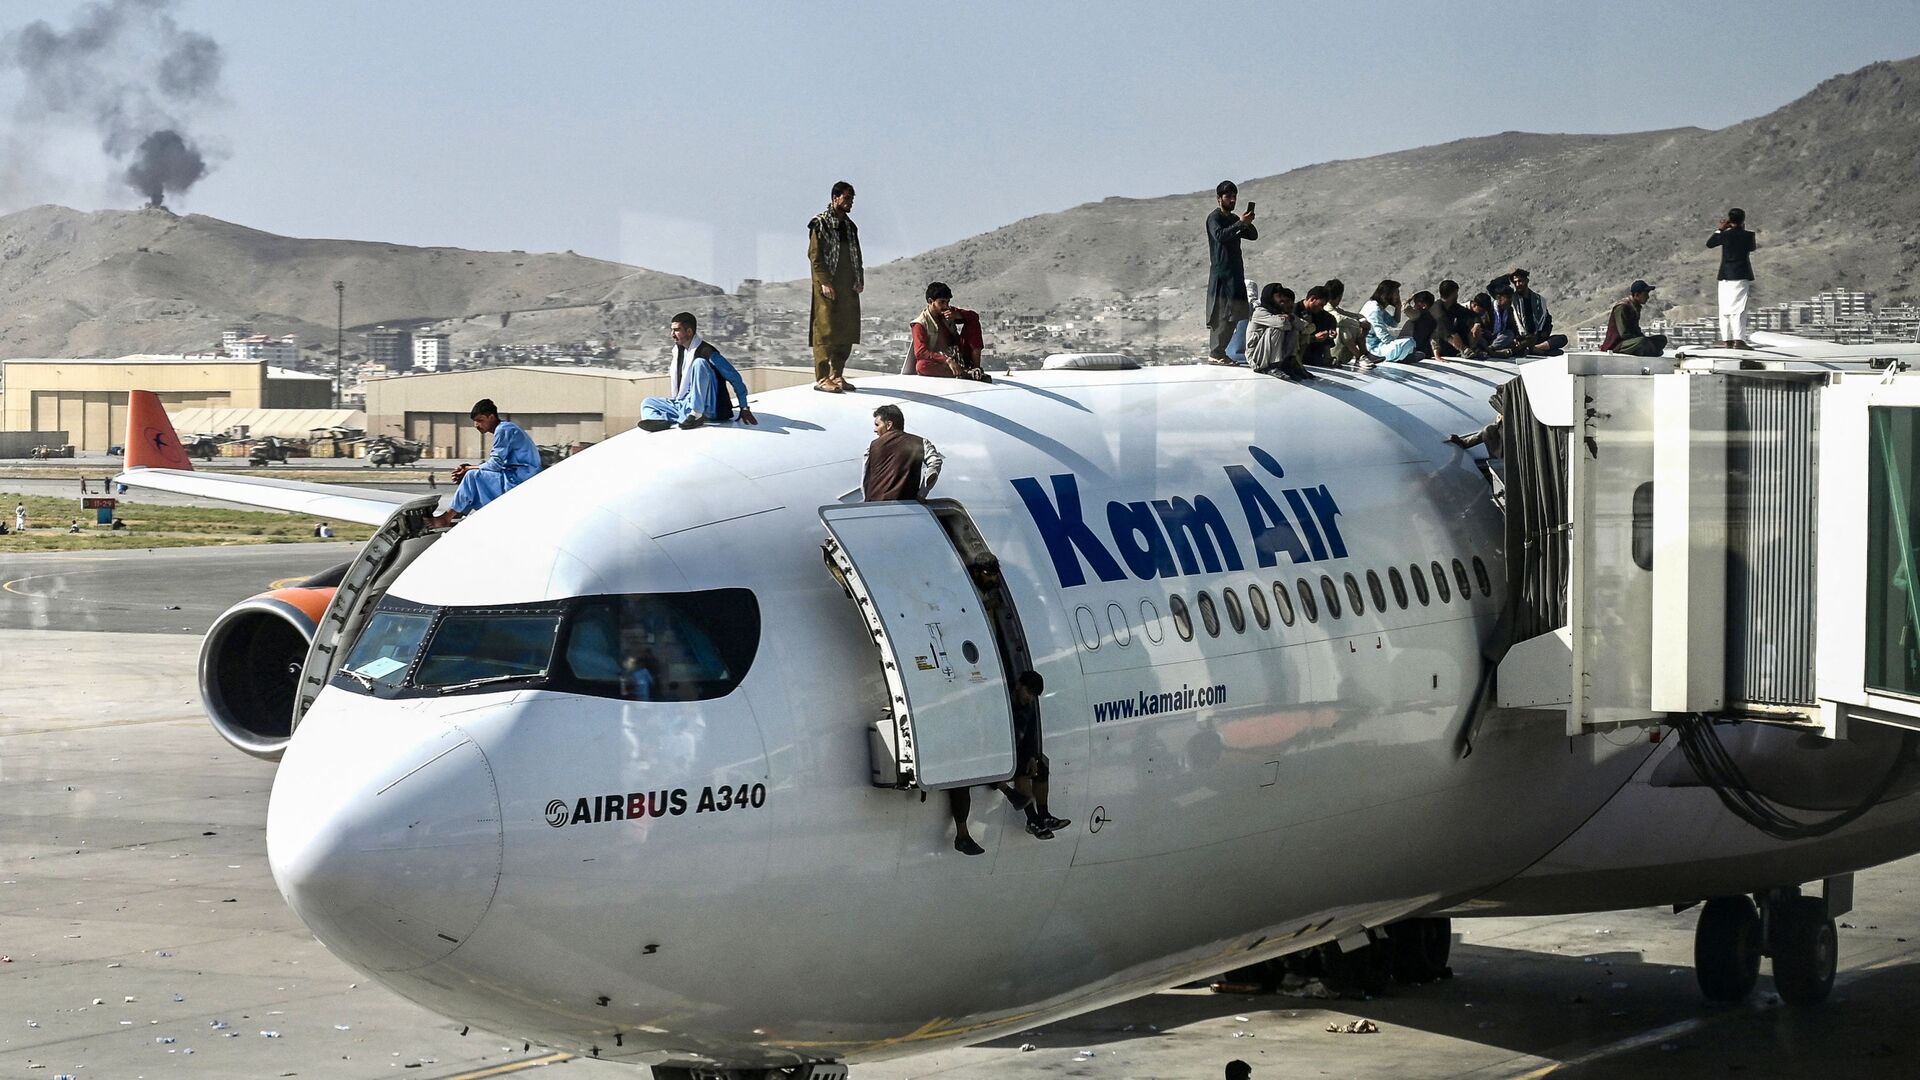 Afghan people climb atop a plane as they wait at the airport in Kabul on August 16, 2021, after a stunningly swift end to Afghanistan's 20-year war, as thousands of people mobbed the city's airport trying to flee the group's feared hardline brand of Islamist rule - Sputnik International, 1920, 19.08.2021